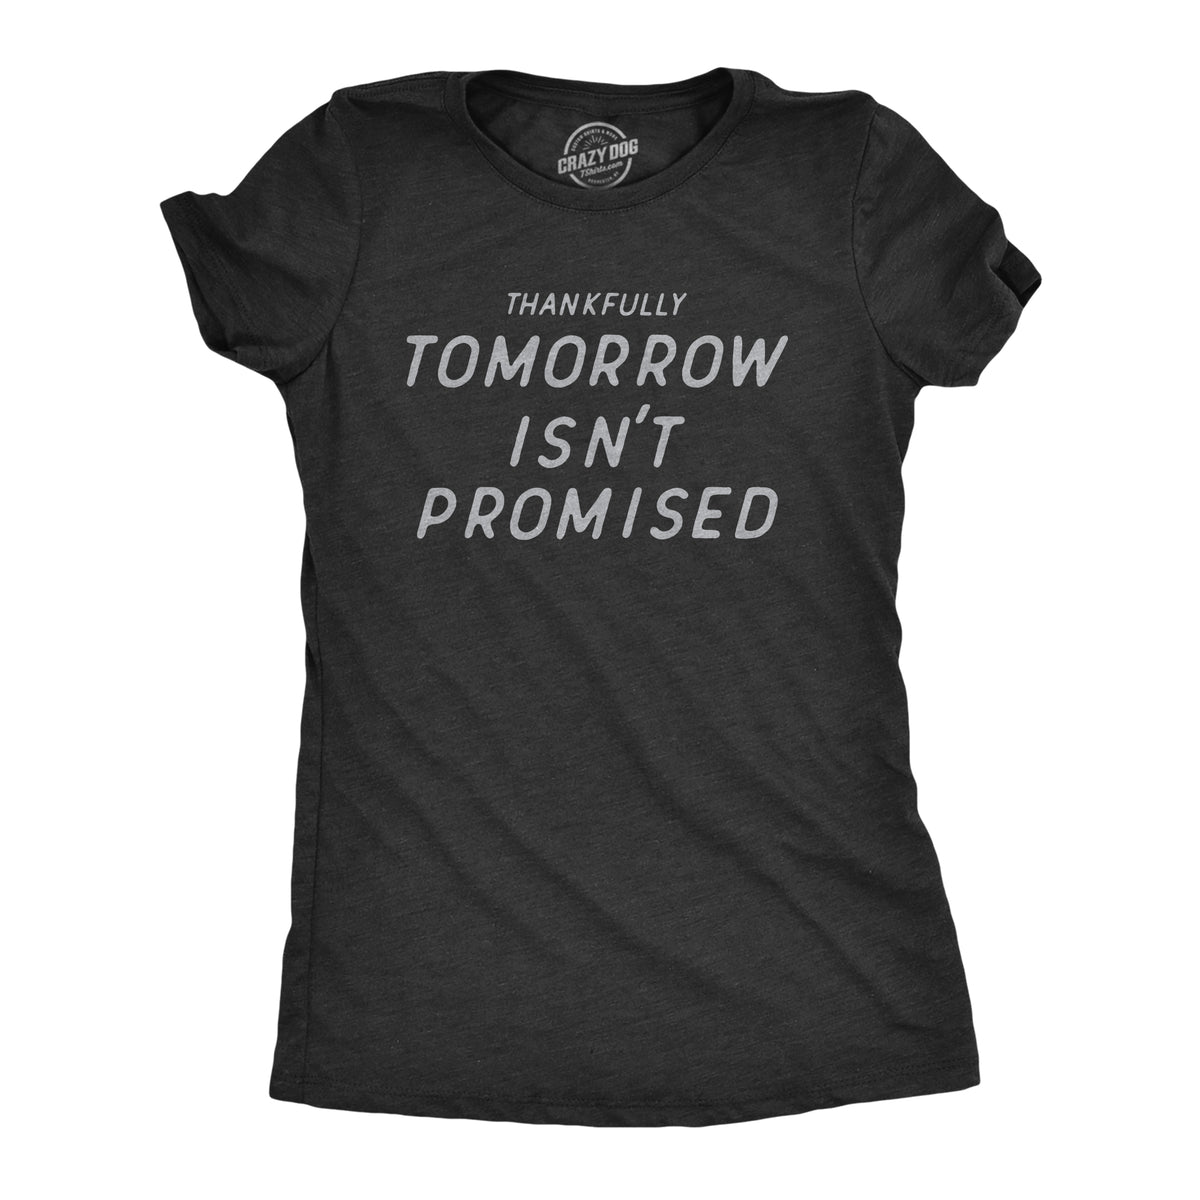 Funny Heather Black - PROMISED Thankfully Tomorrow Isnt Promised Womens T Shirt Nerdy sarcastic Tee